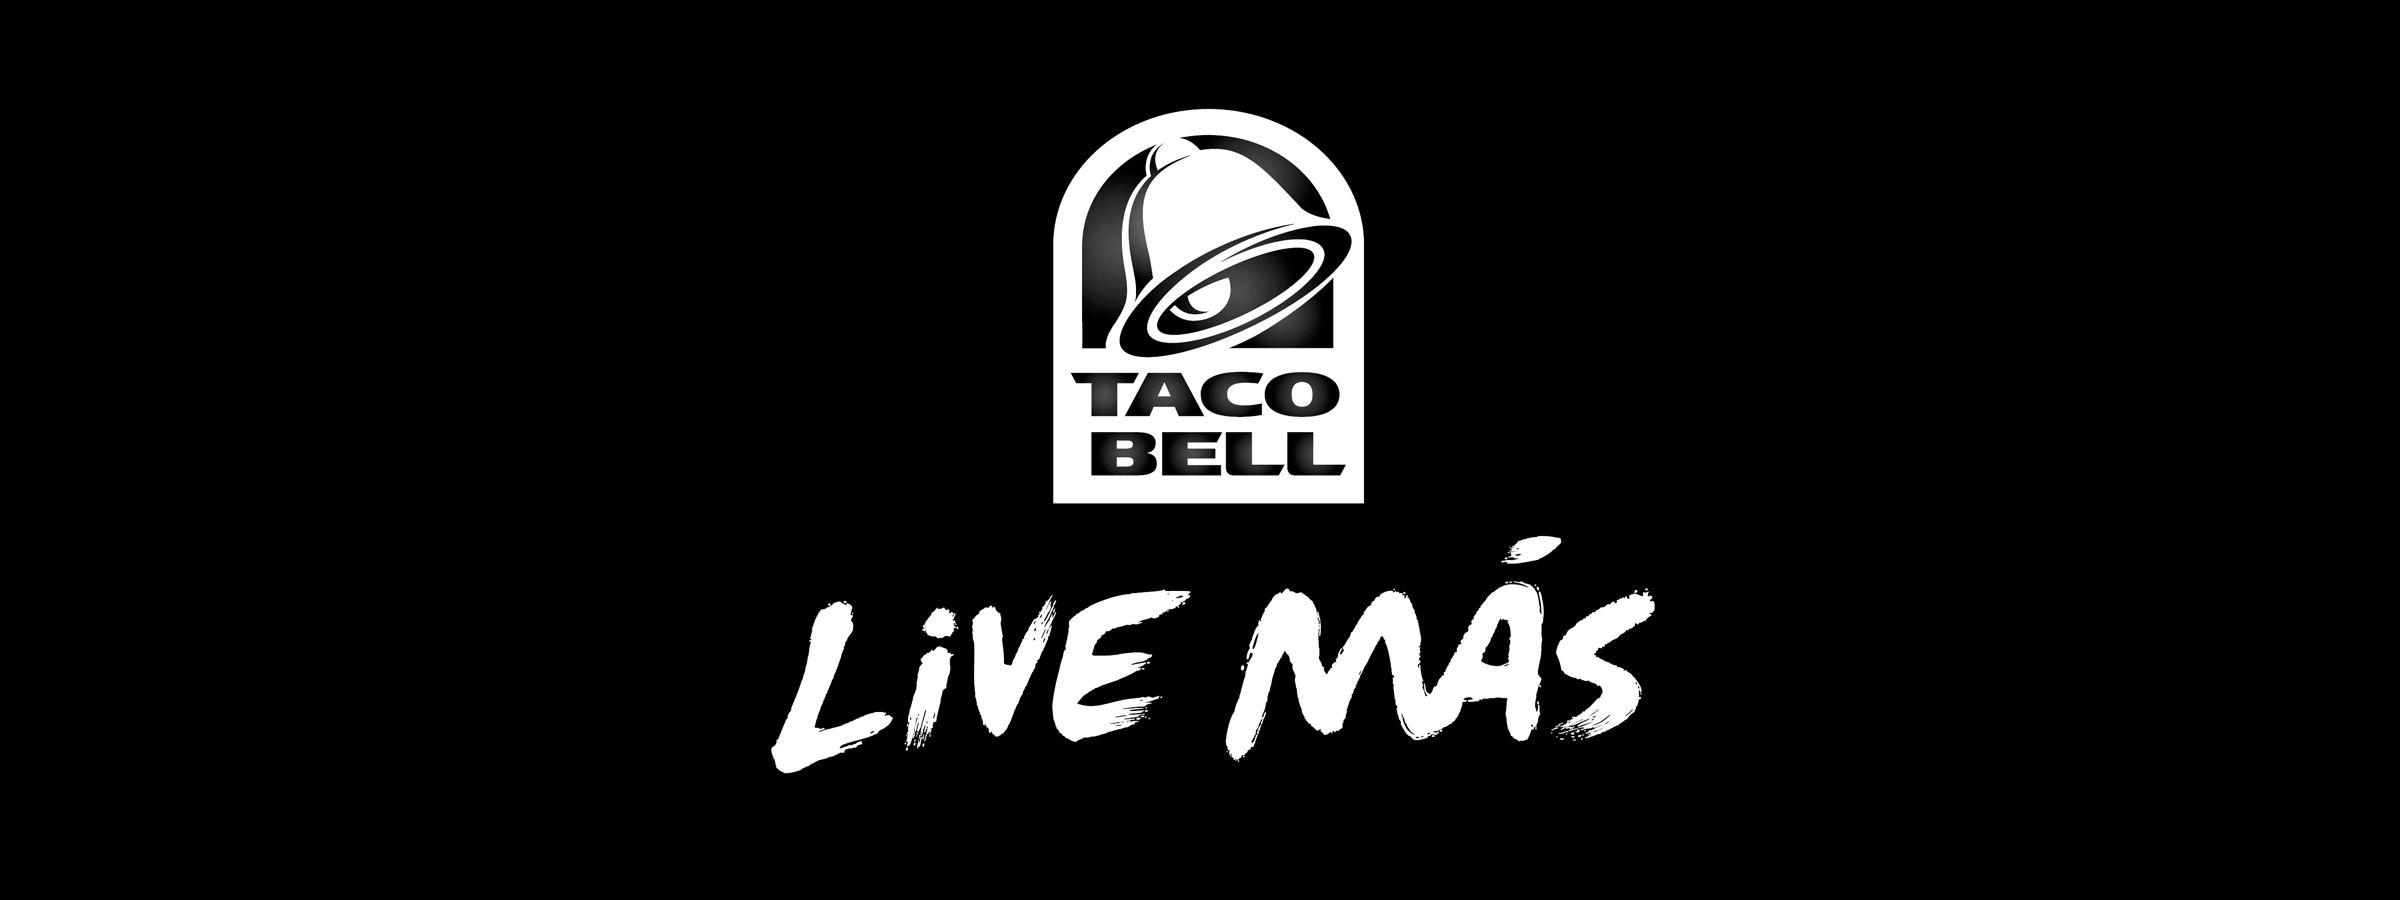 Taco Bell Live Mas Logo - Taco Bell Encourages Customers to “Live Más” | Benjamin Stouch